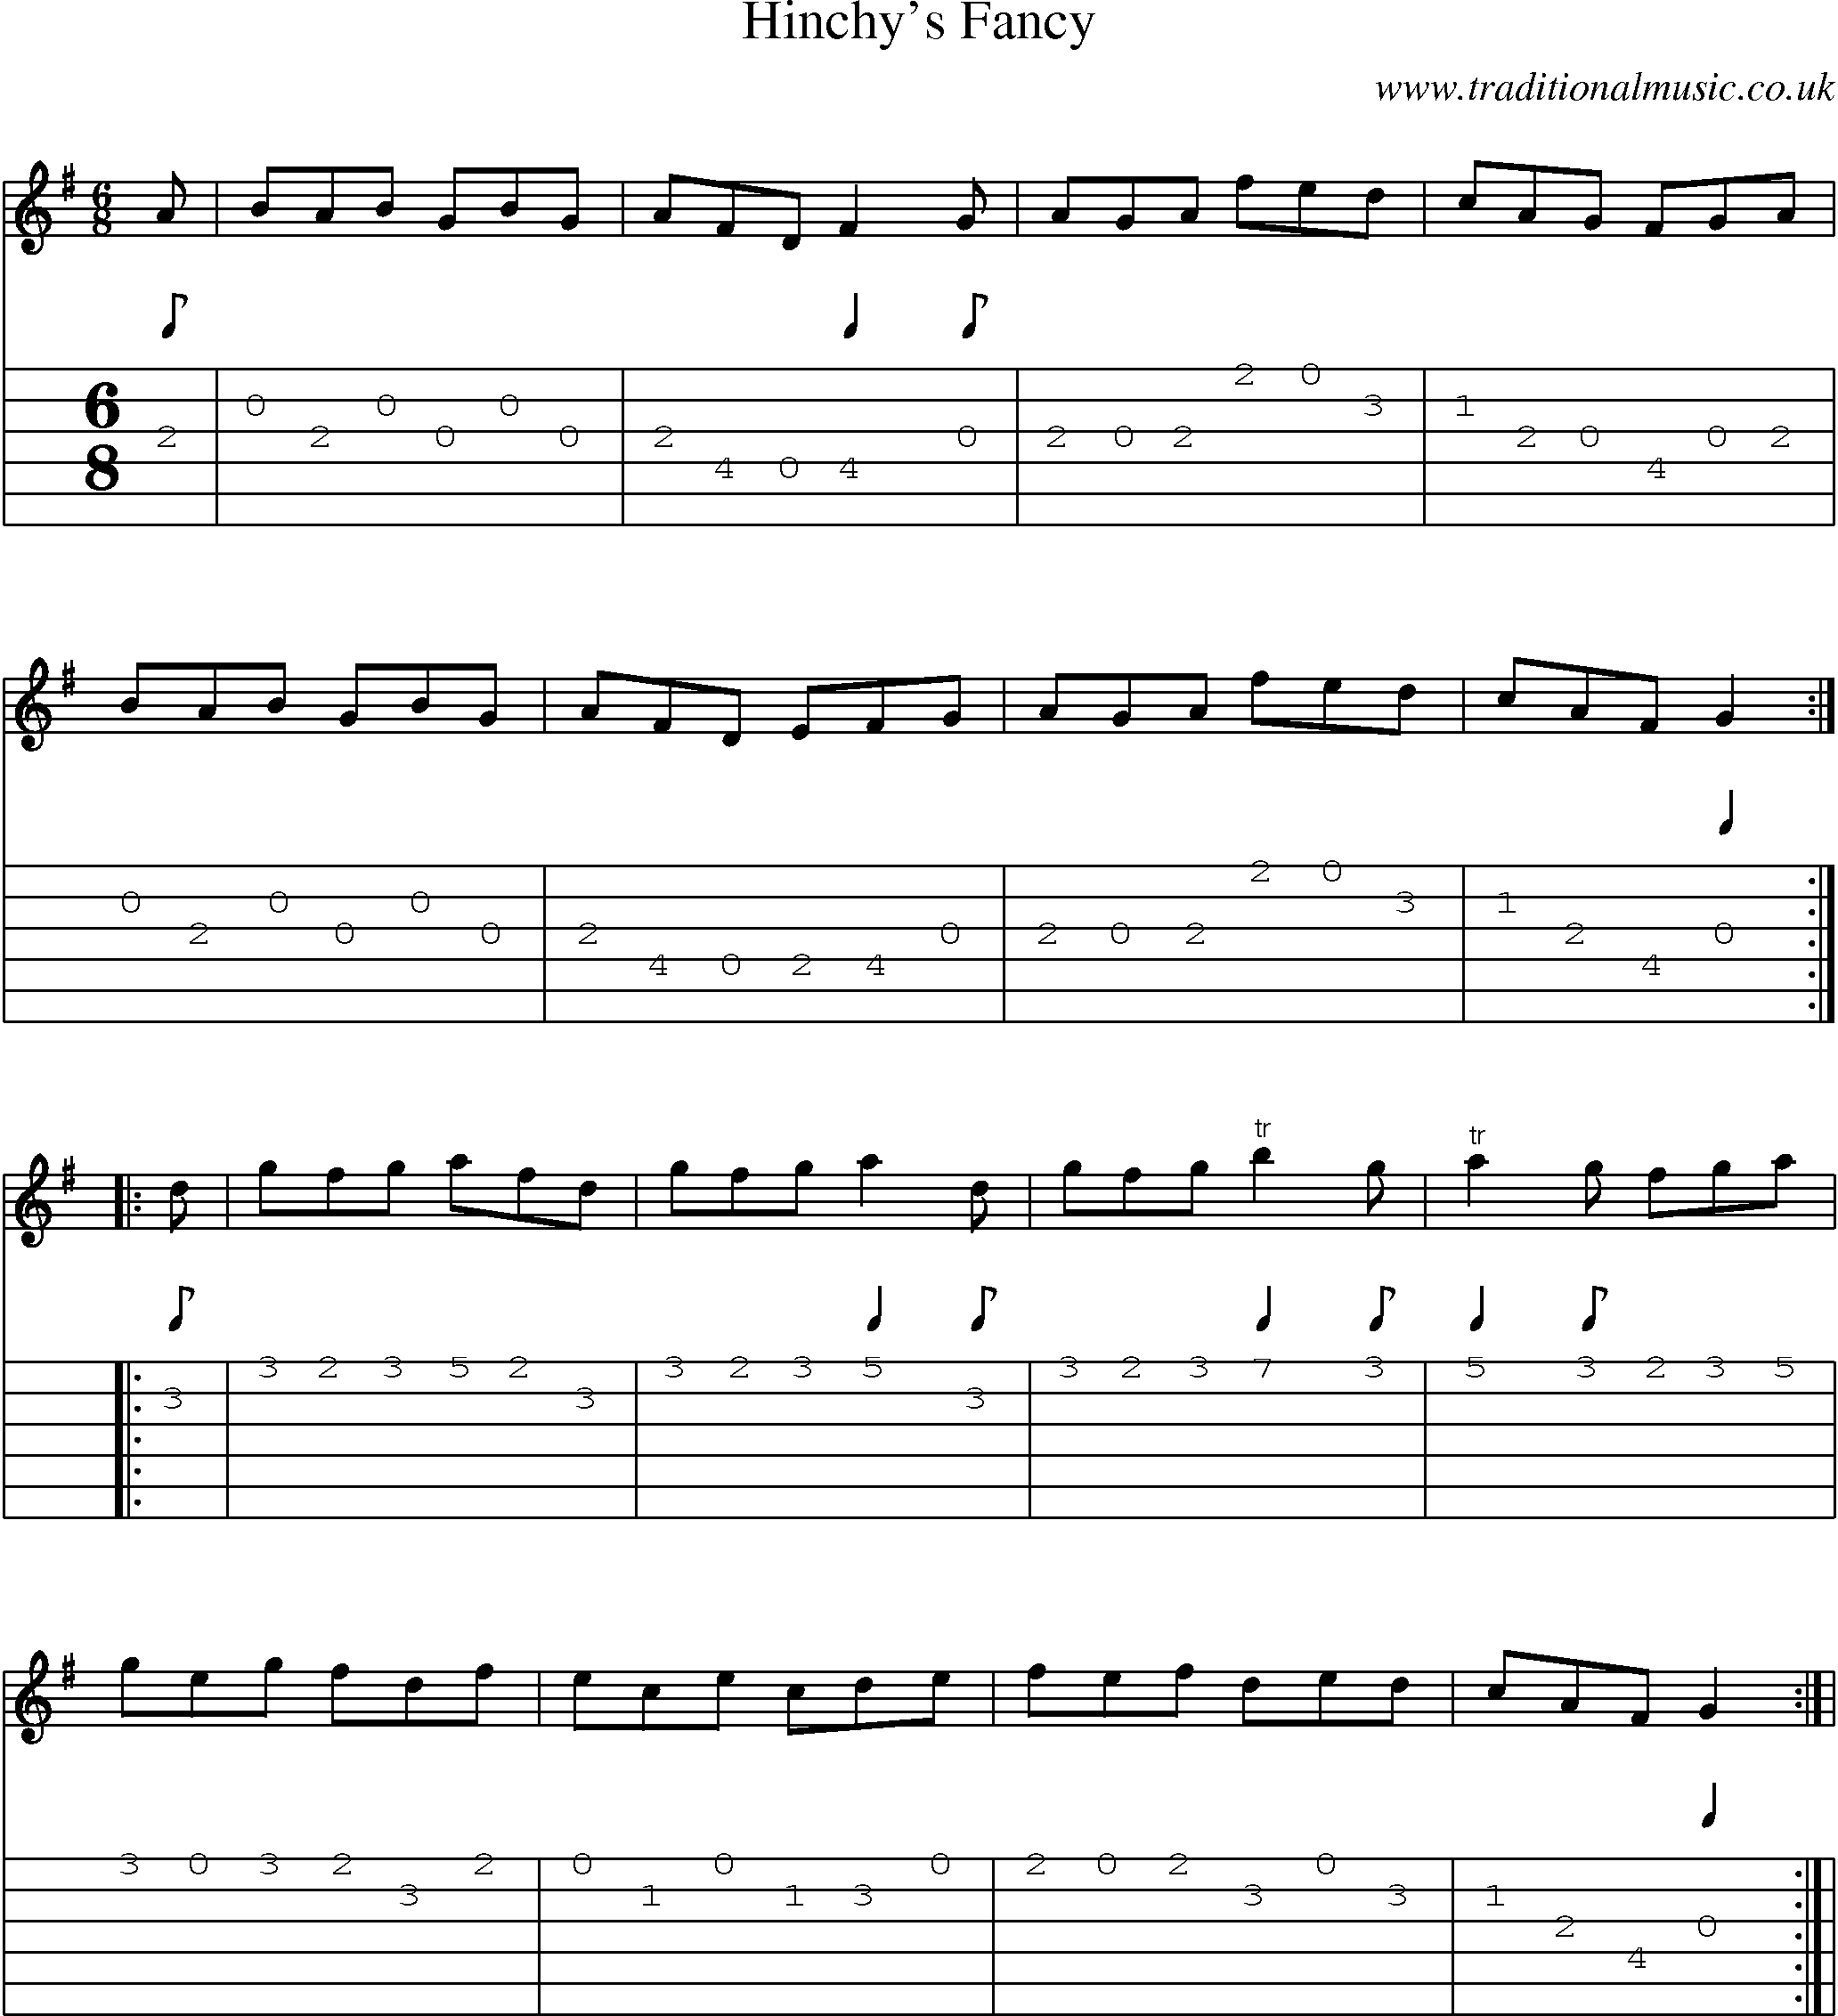 Music Score and Guitar Tabs for Hinchys Fancy